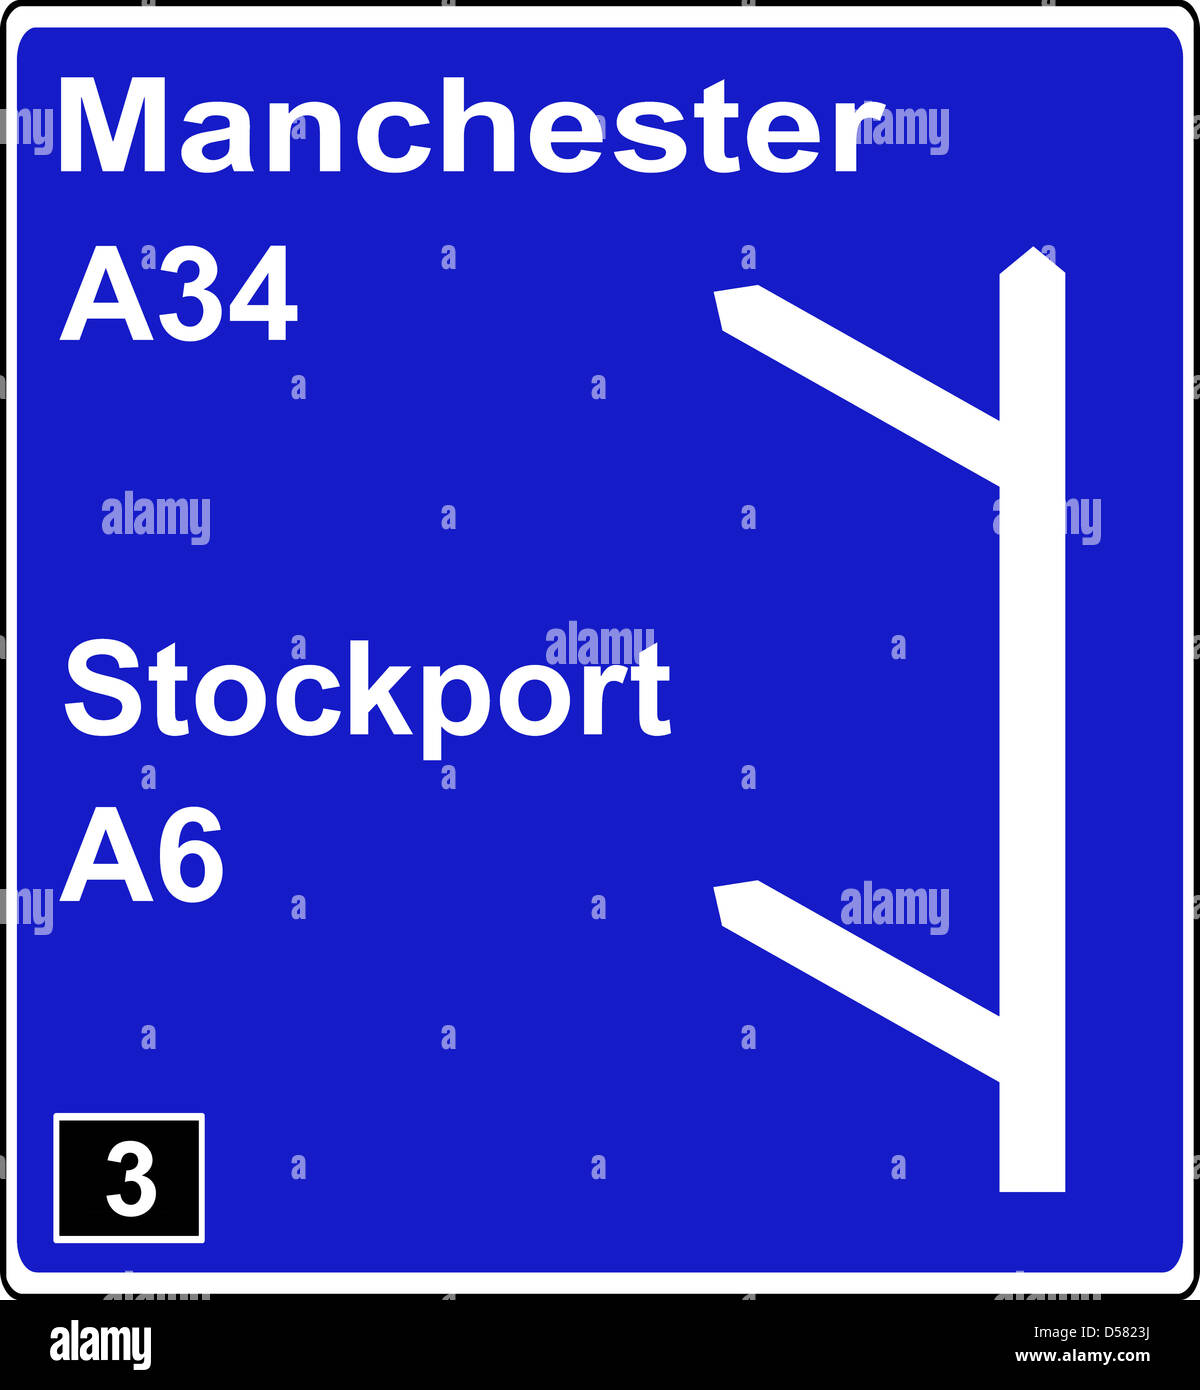 Two junctions in quick succession on the motorway sign Stock Photo